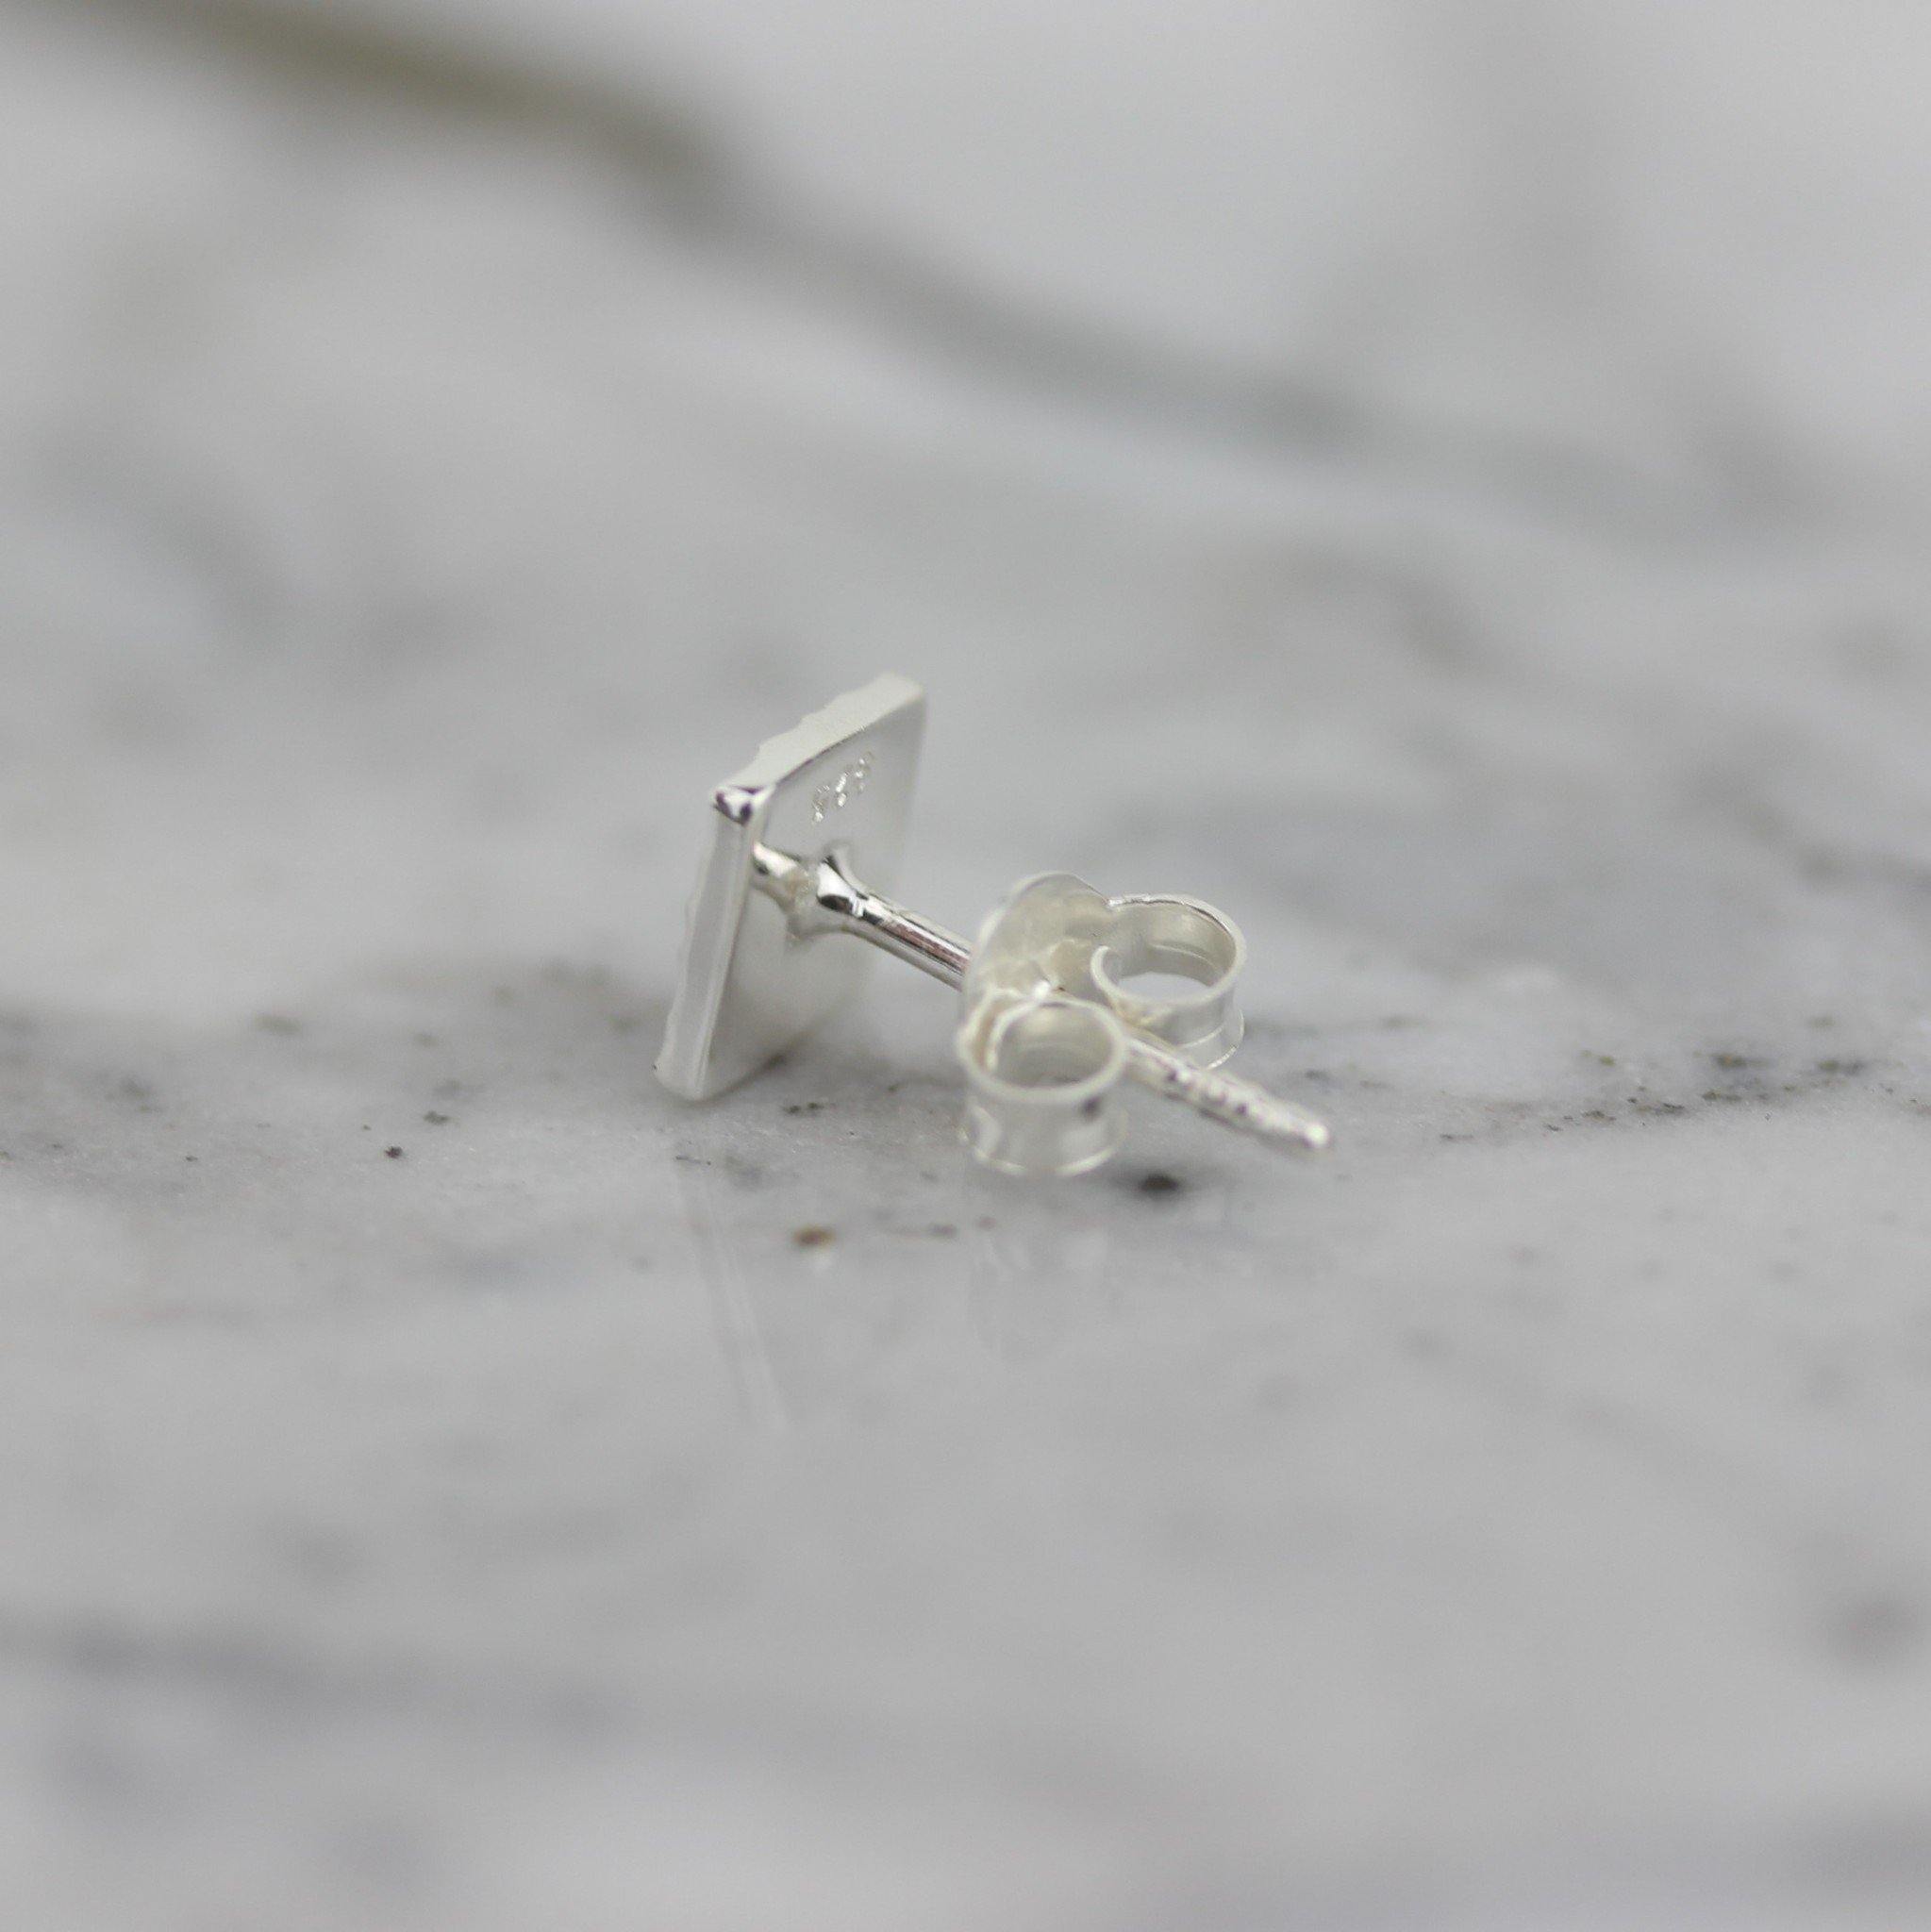 Sterling Silver Small 6mm Square Matte,Hammered Beaten Stud Earrings - STERLING SILVER DESIGNS